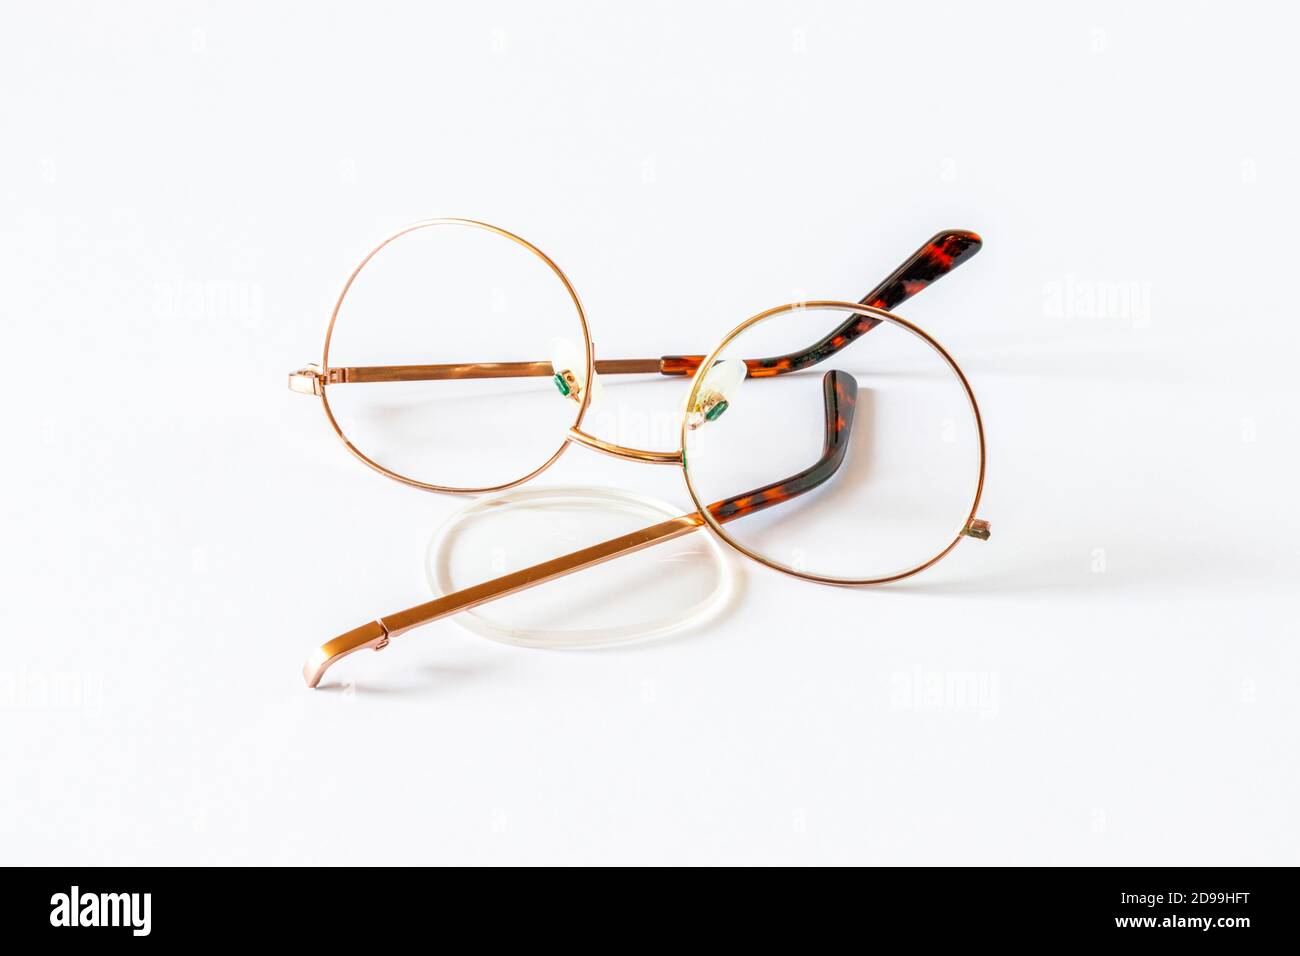 A broken pair of glasses on a white background Stock Photo